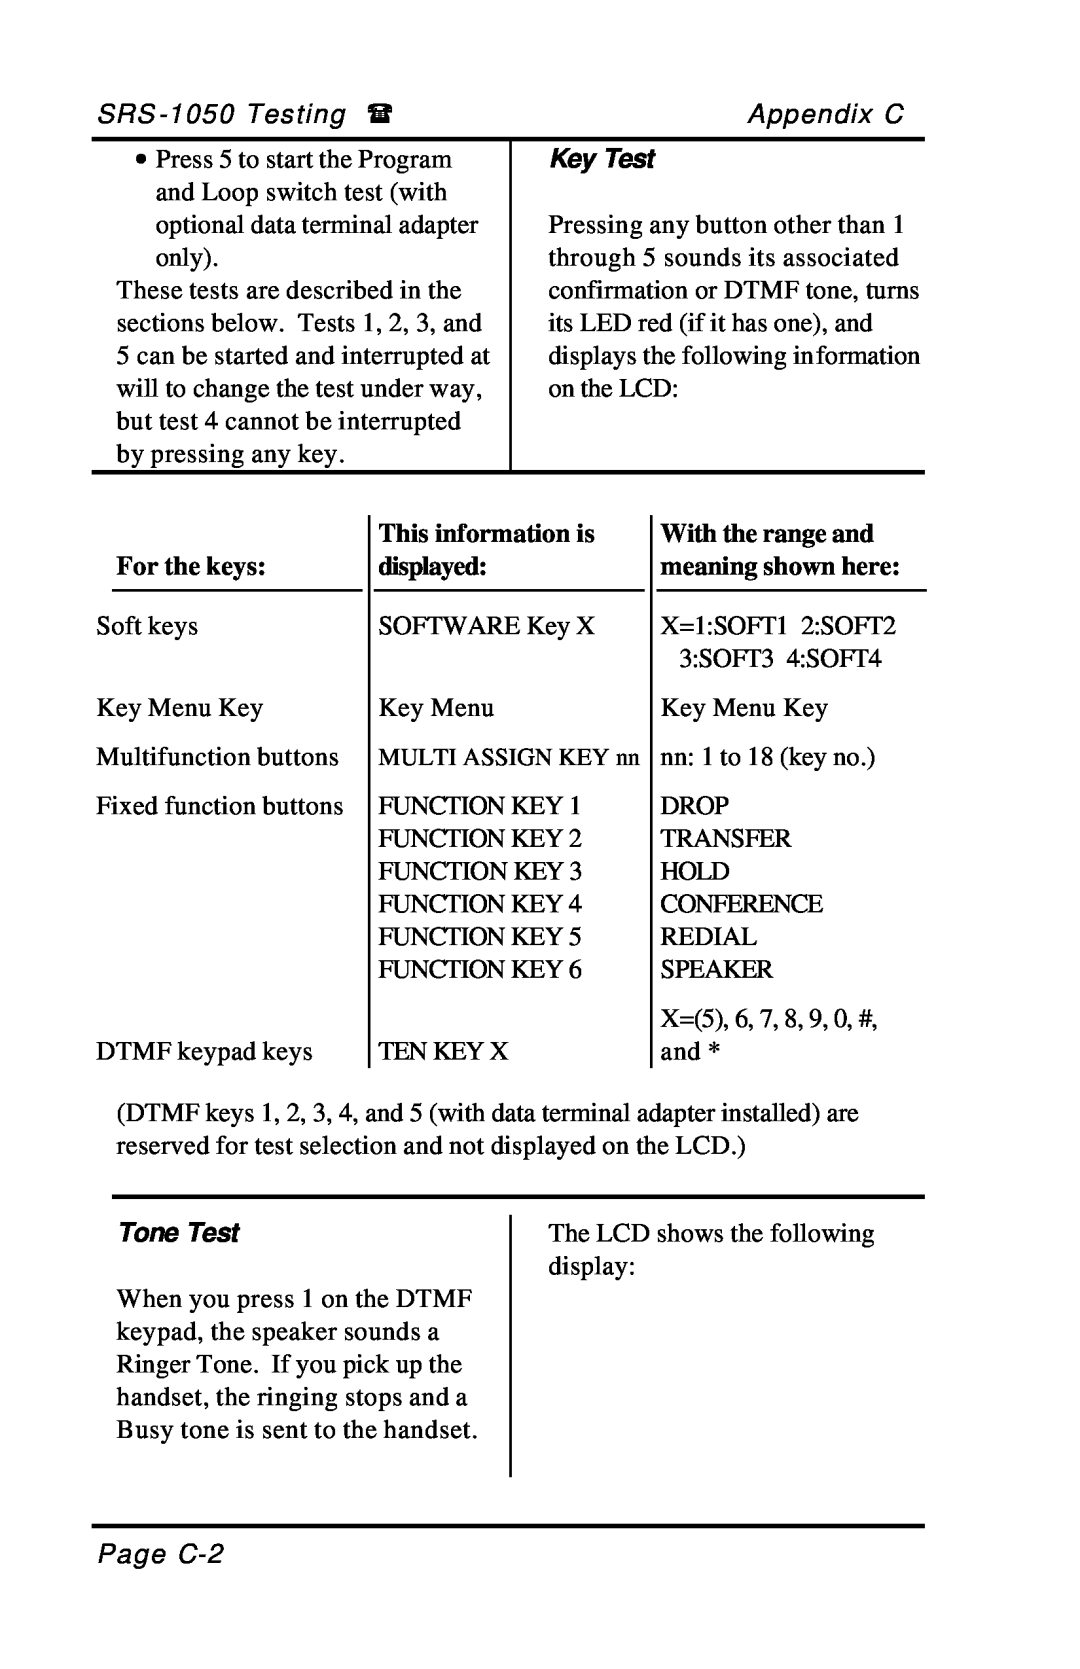 Fujitsu SRS-1050 Key Test, Tone Test, For the keys, This information is displayed, With the range and meaning shown here 